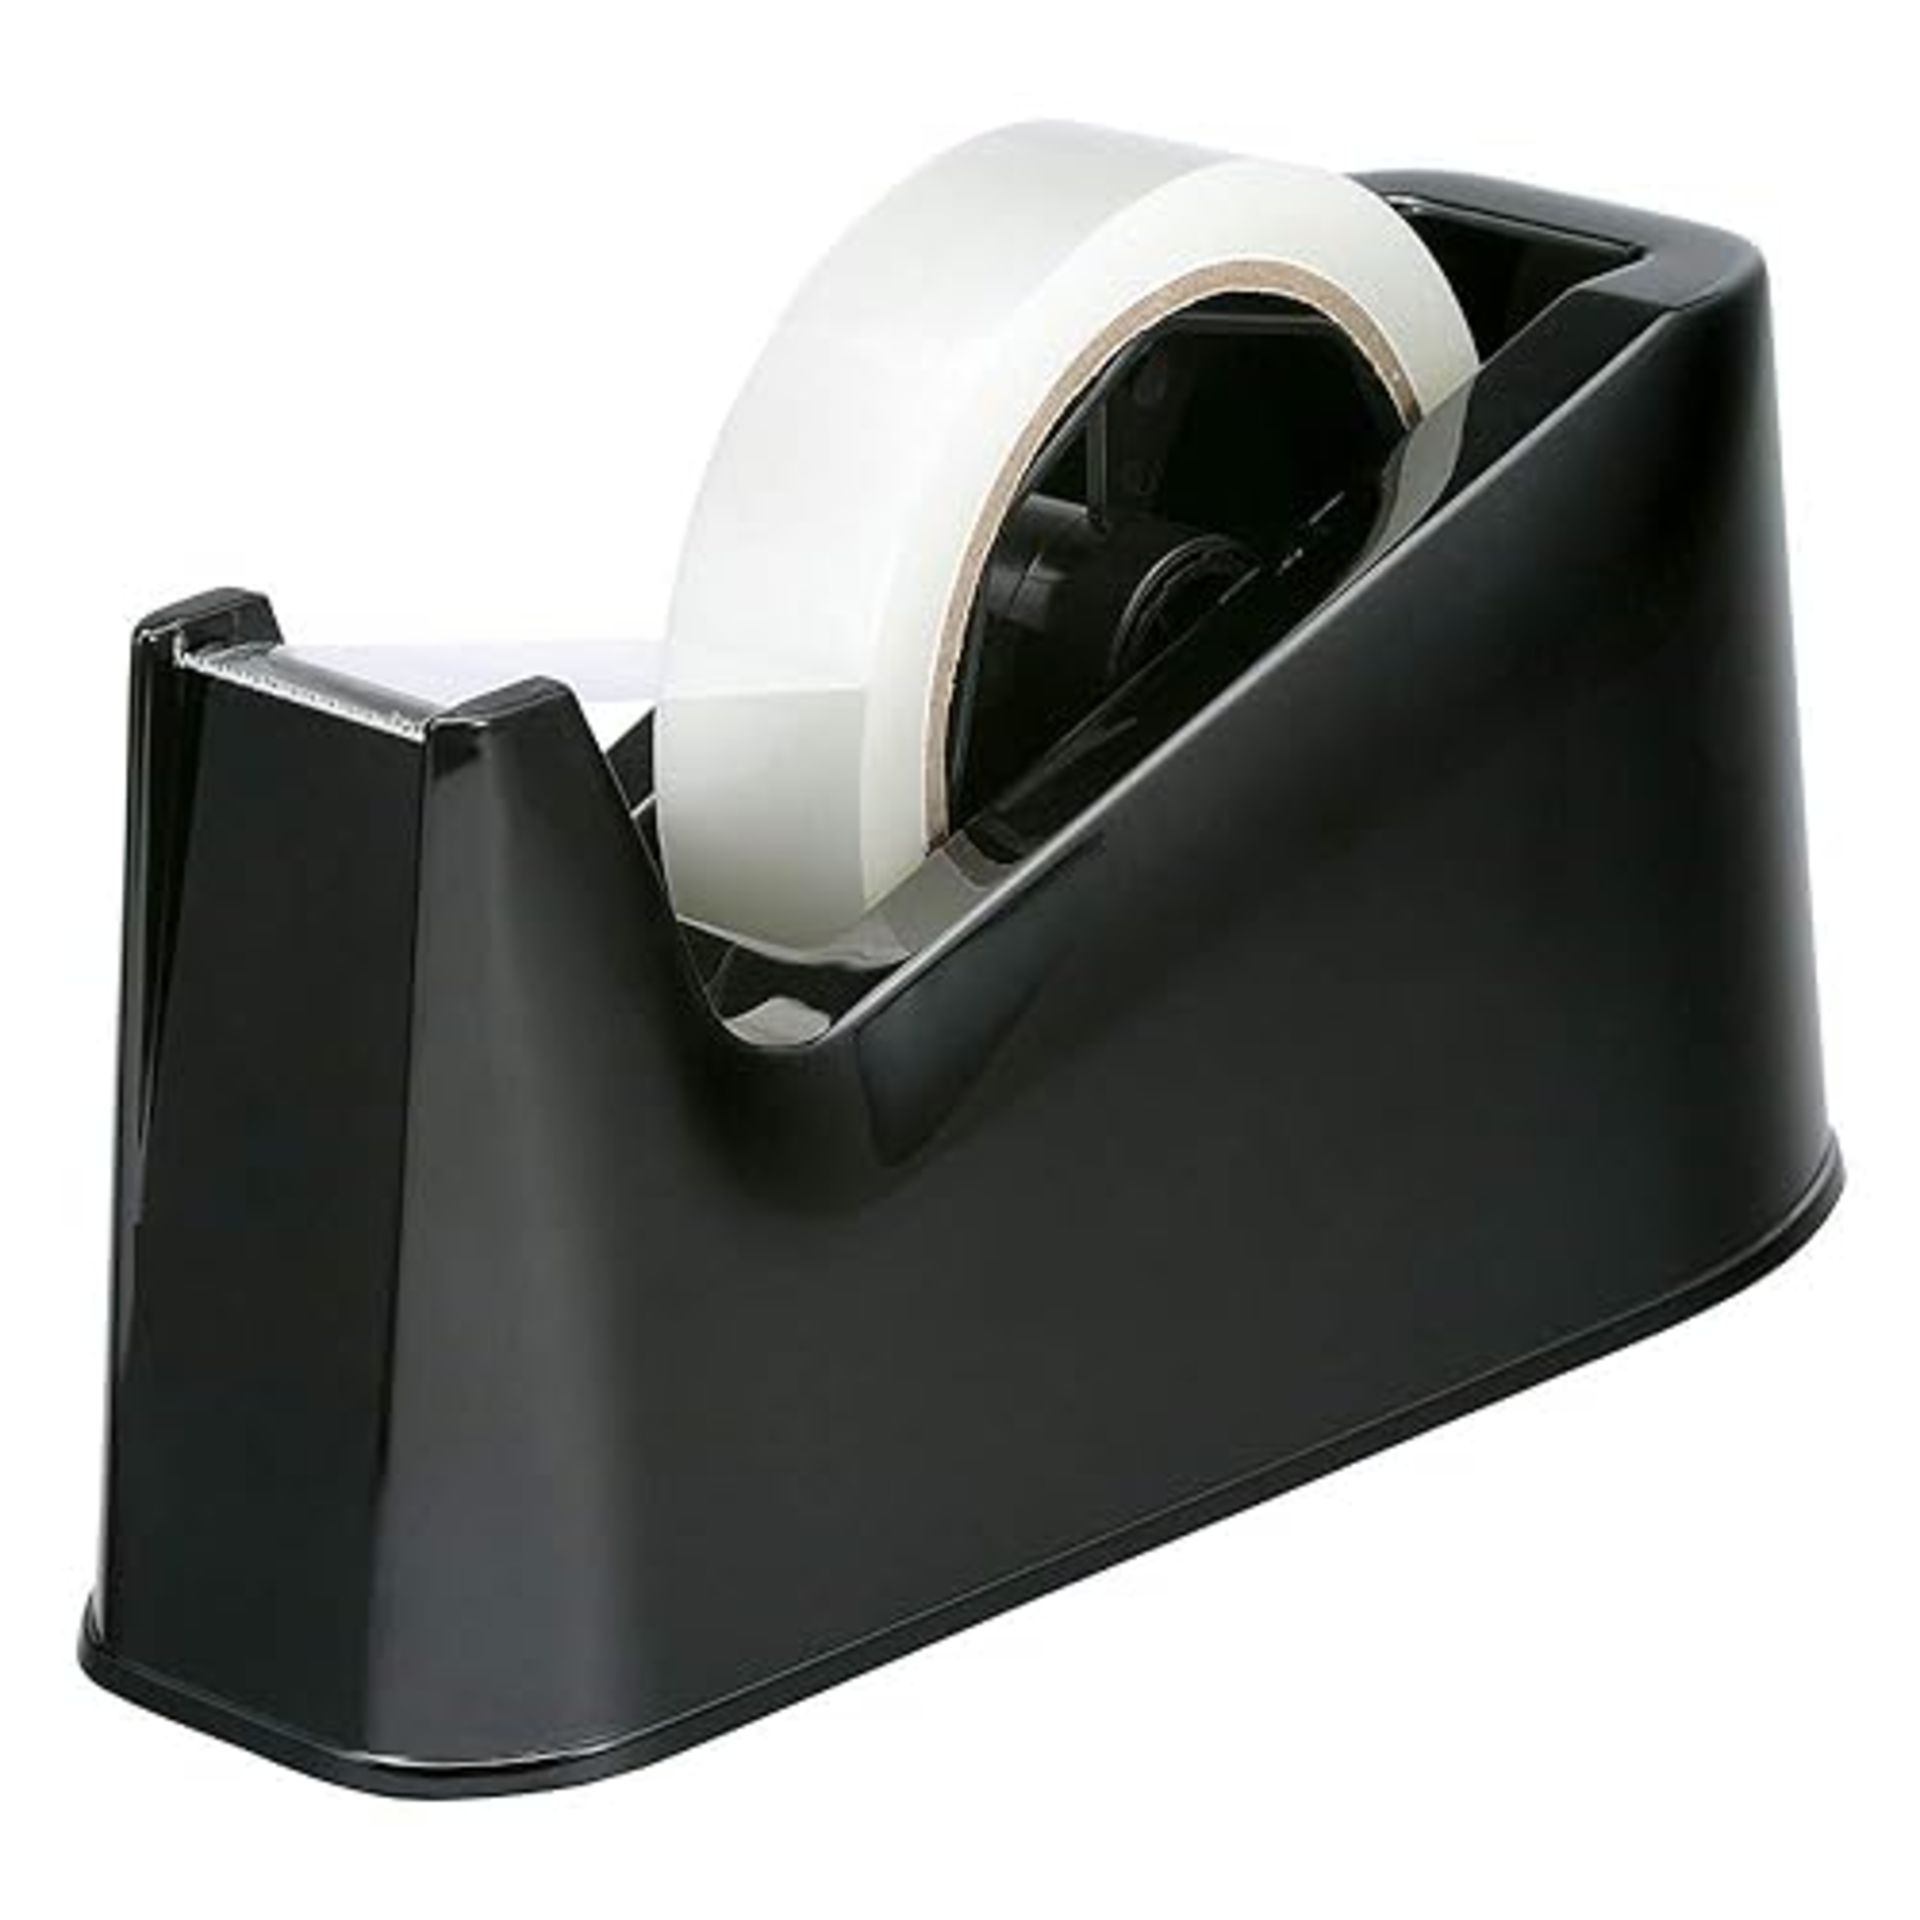 Heavy Duty, Tape Dispenser - Weighted, Non-Skid Rubber Base - High-Quality, Sharp Cutting Blade - B